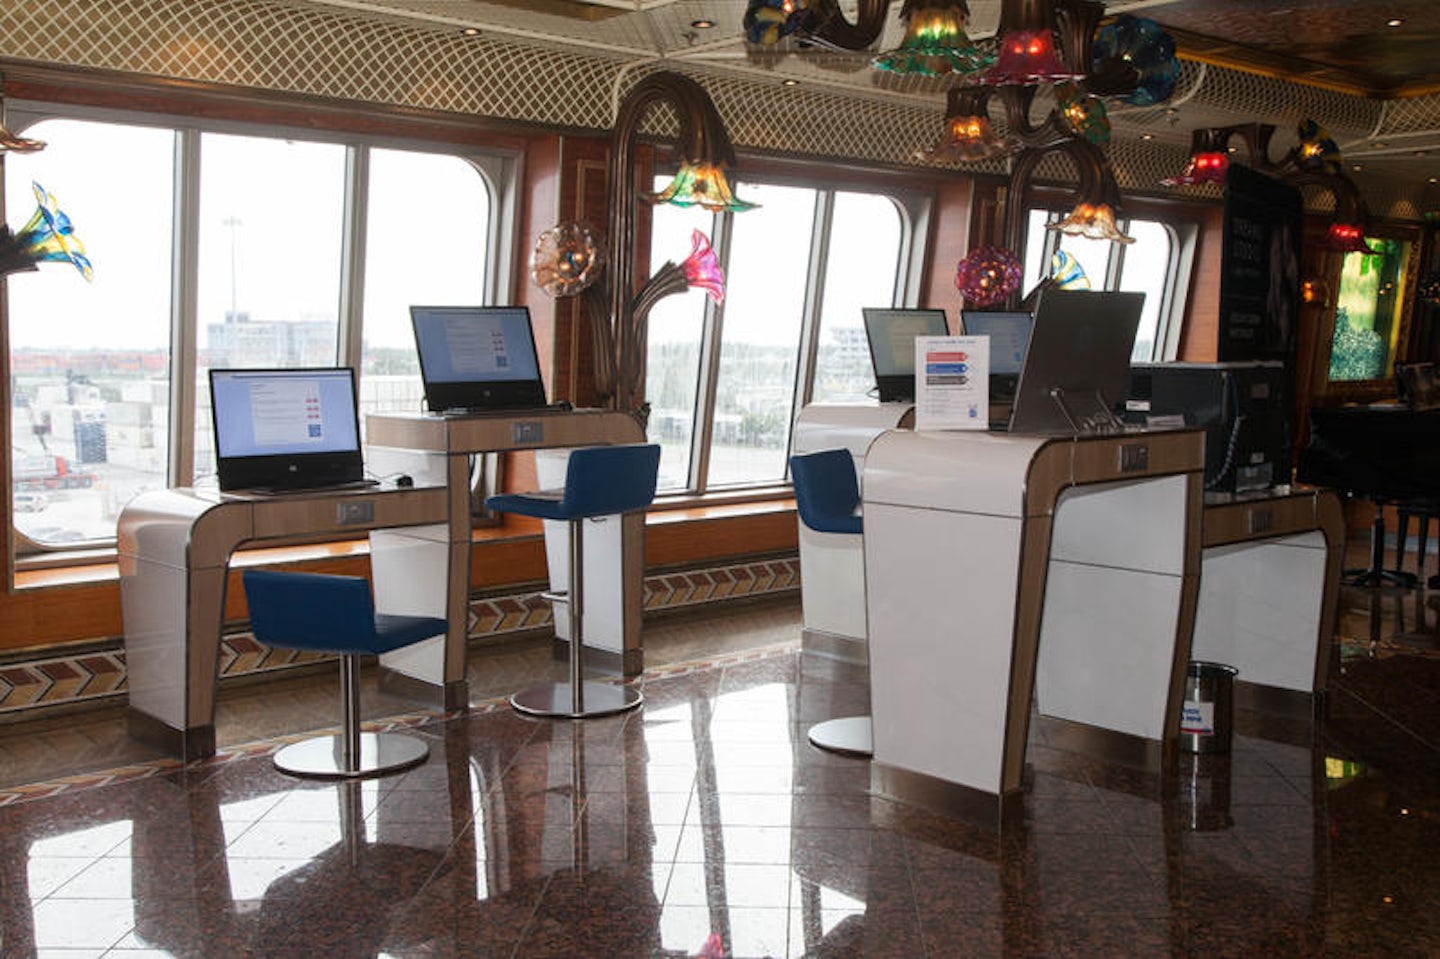 Internet Cafe on Carnival Conquest